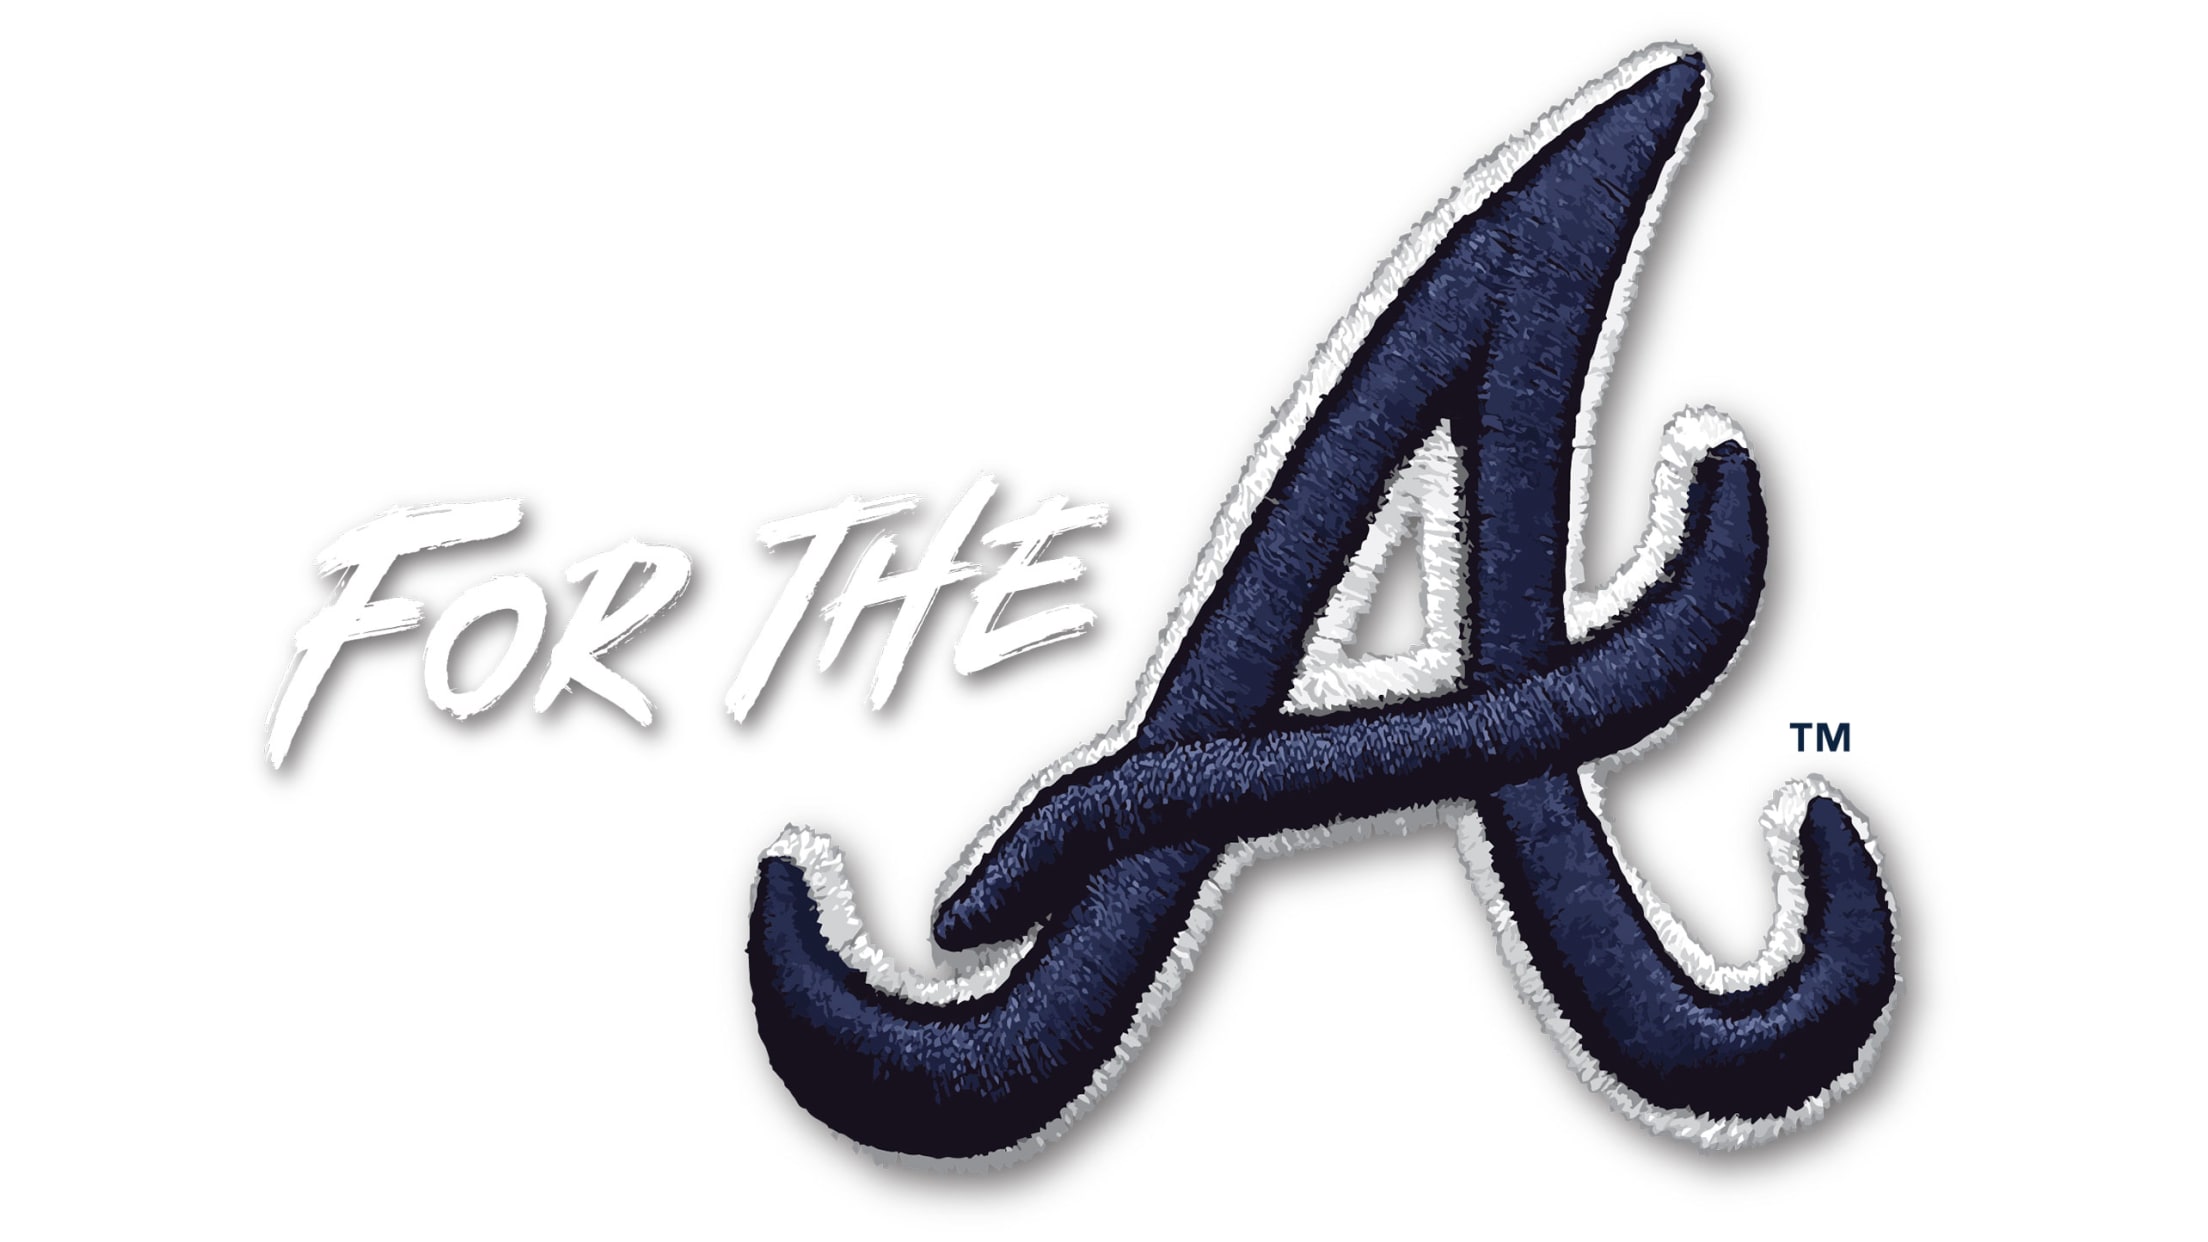 Download Get the official Atlanta Braves logo wallpaper for your iPhone  Wallpaper  Wallpaperscom